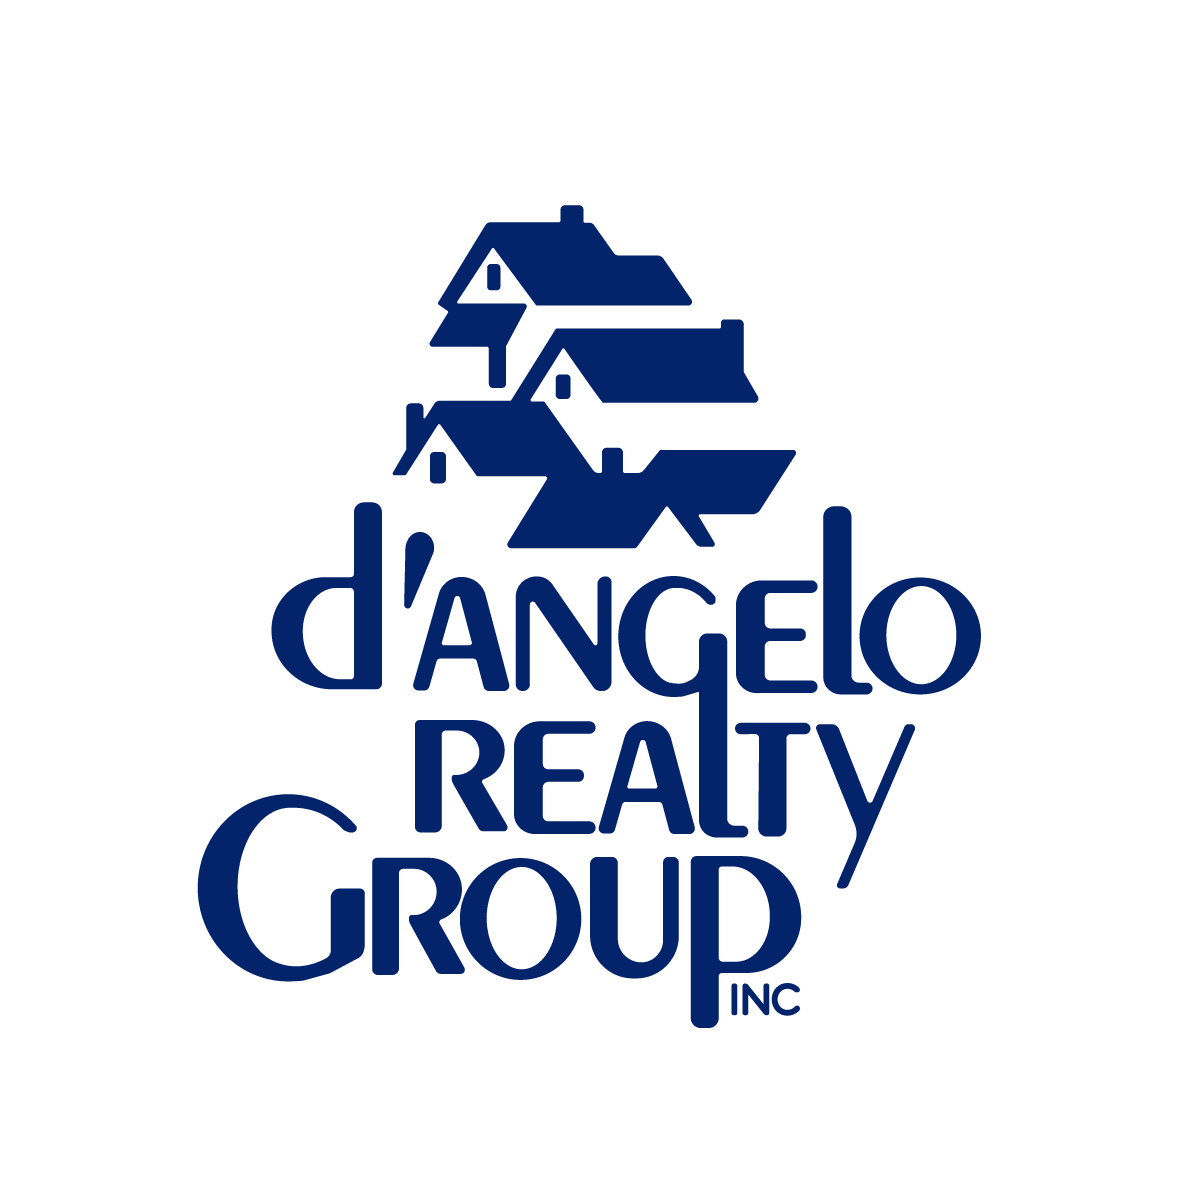 D'Angelo Realty Group, Inc.